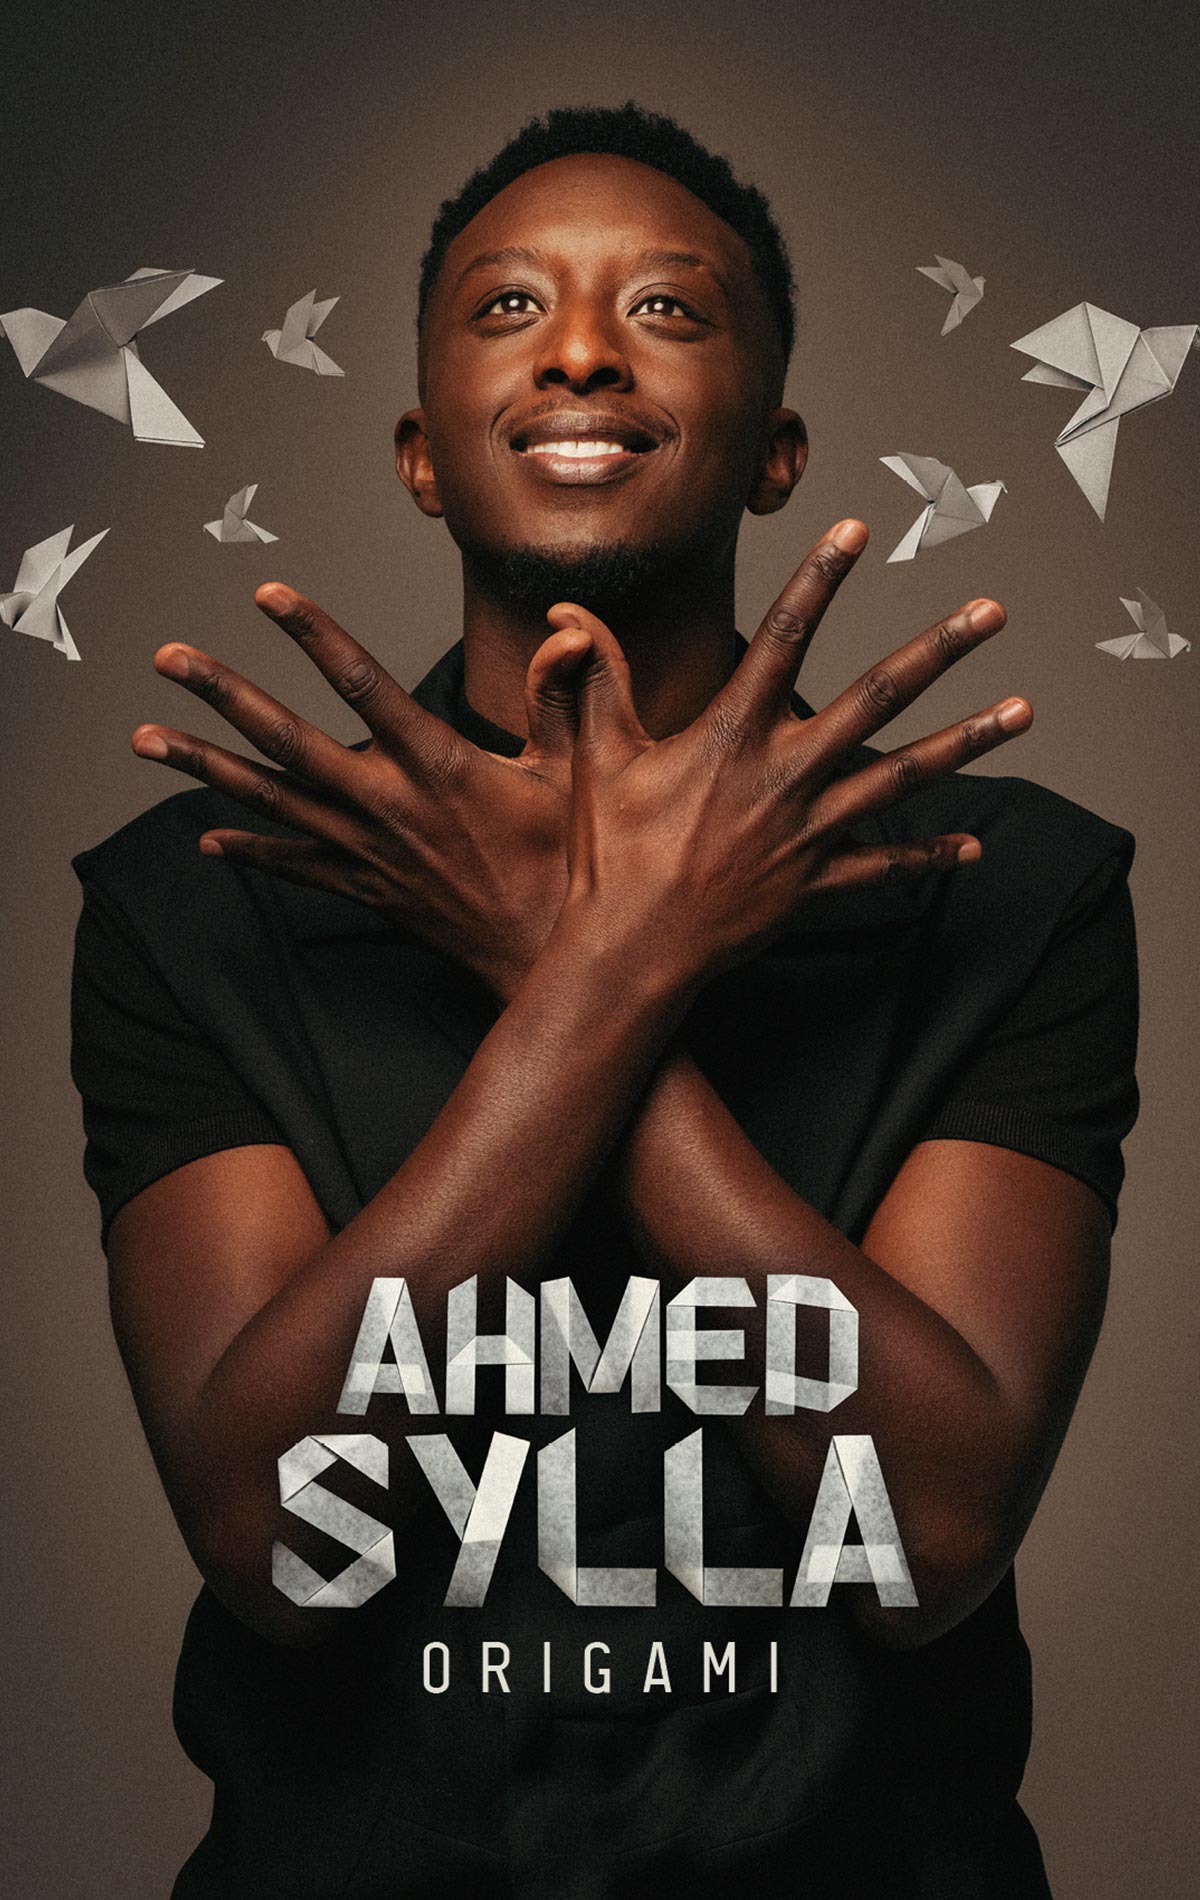 Ahmed Sylla at Zenith Lille Tickets